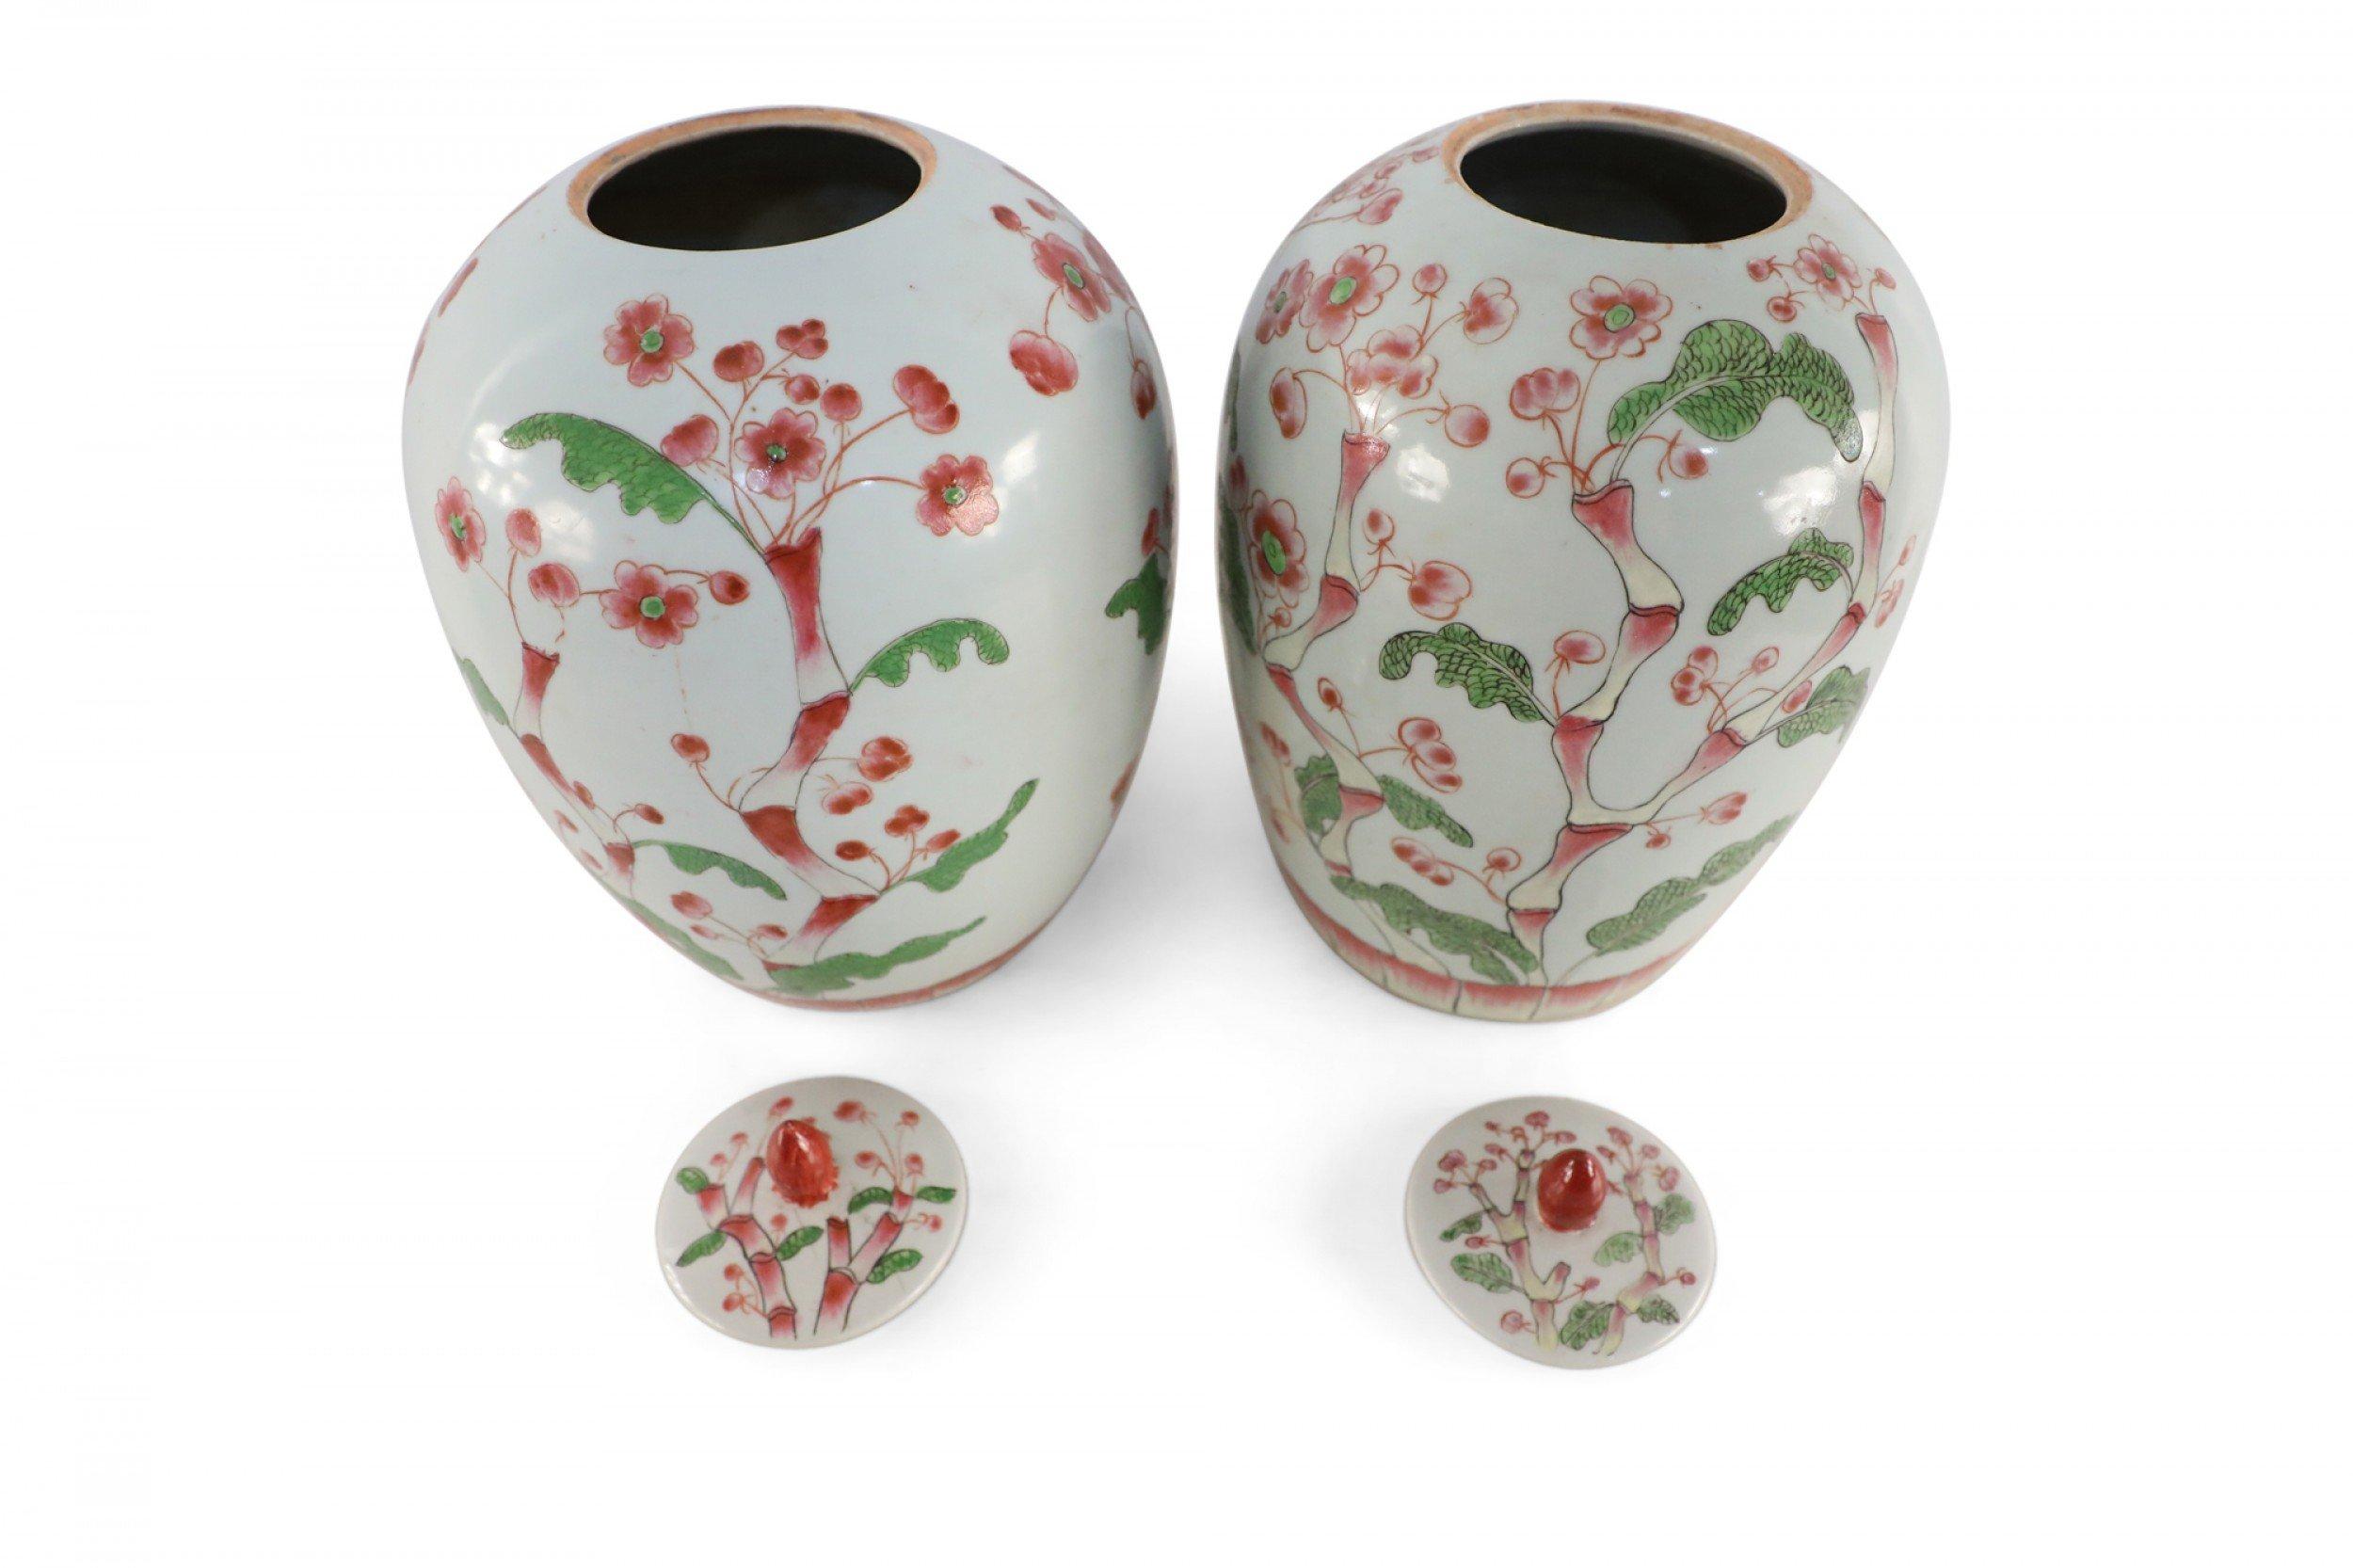 Pair of Chinese White and Pink Cherry Blossom Motif Lidded Porcelain Urns For Sale 3